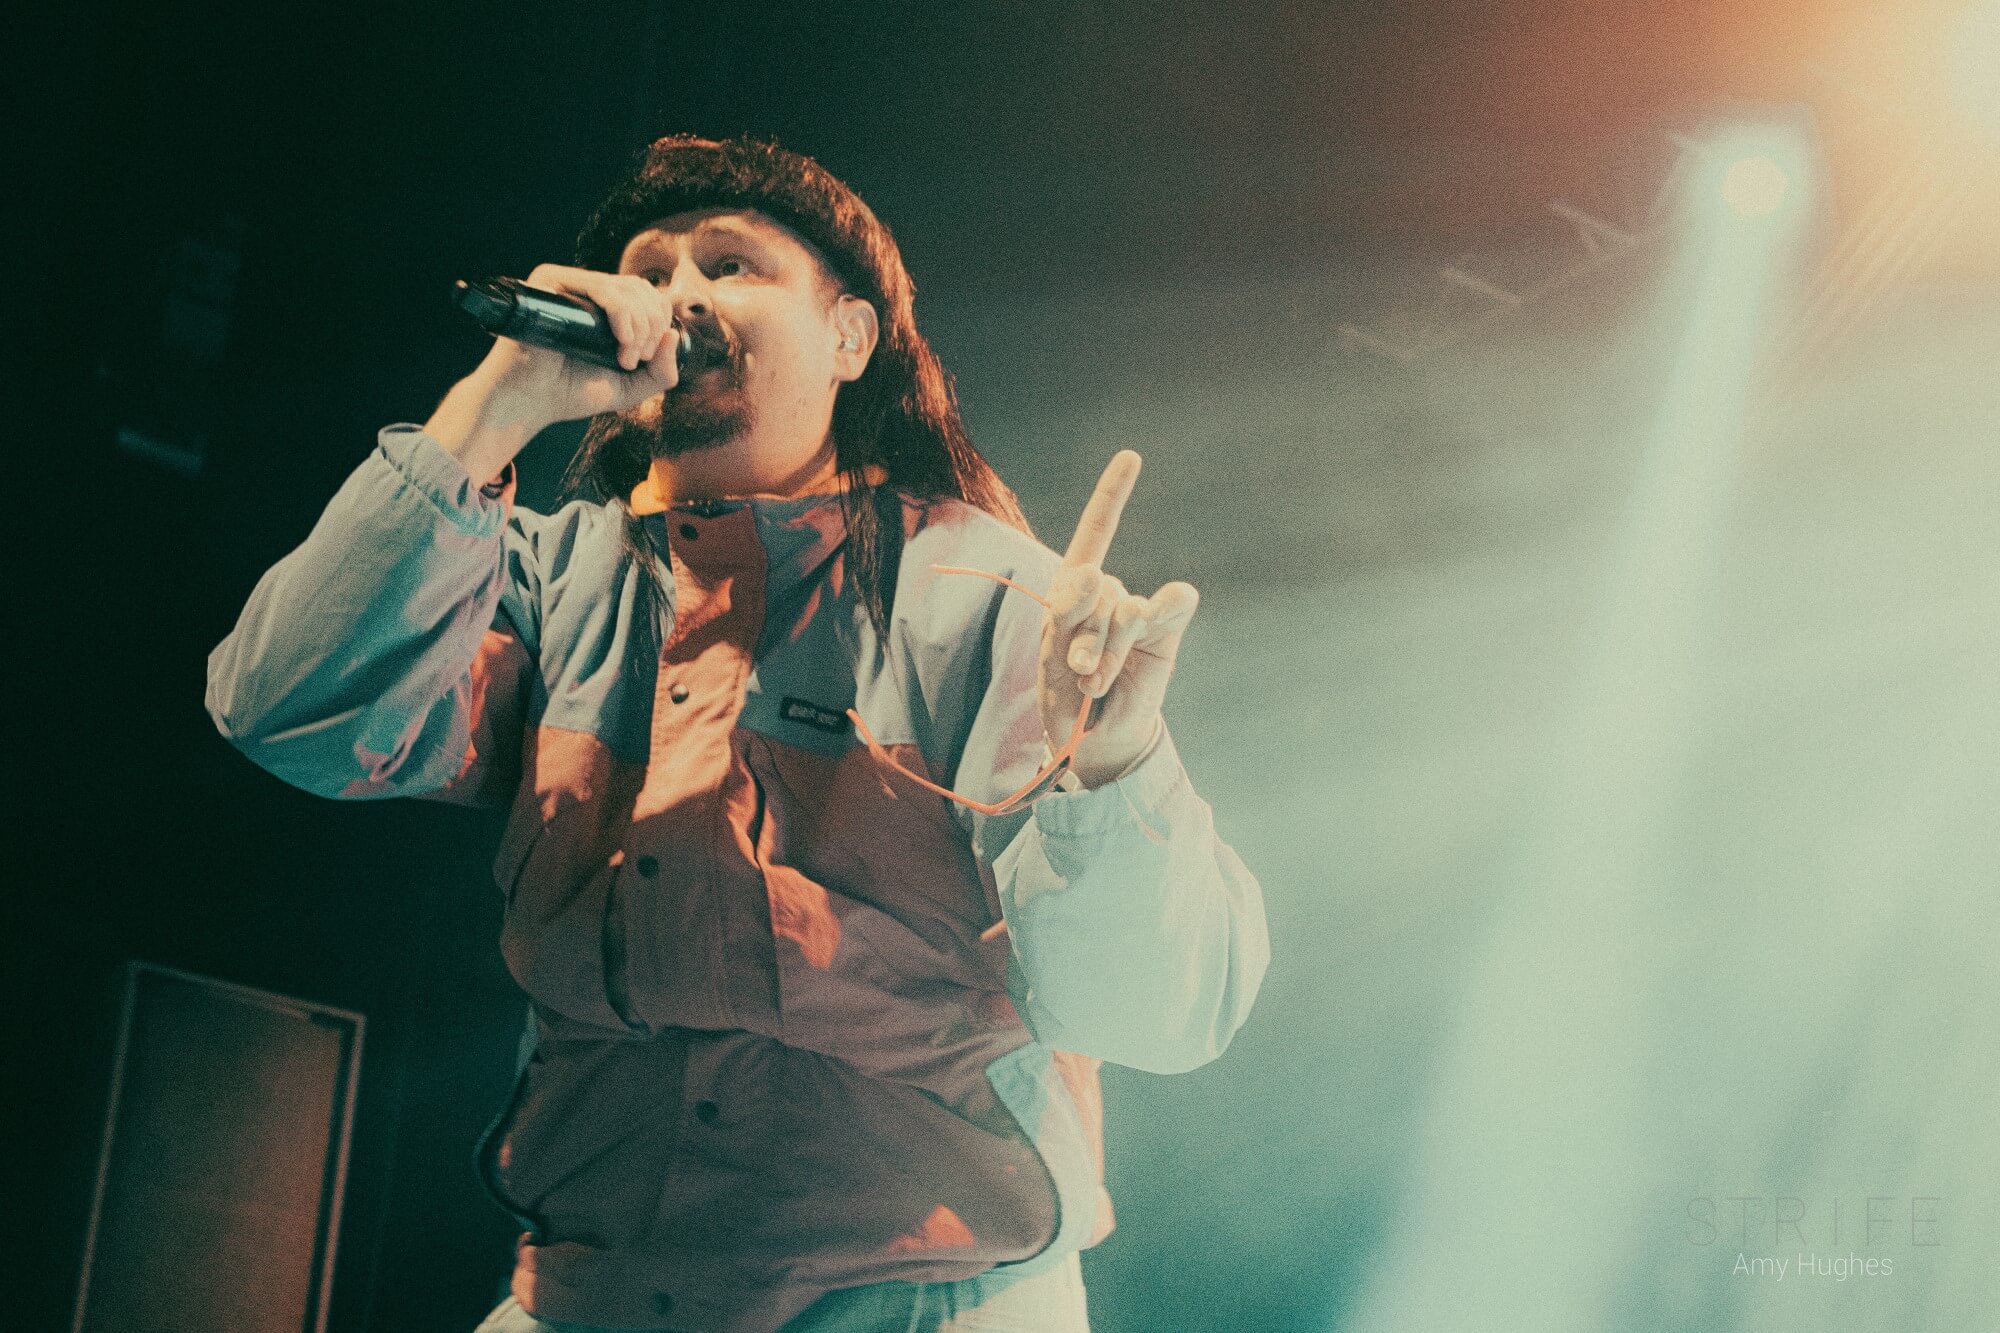 Concert review: Oliver Tree's over-the-top antics distract from